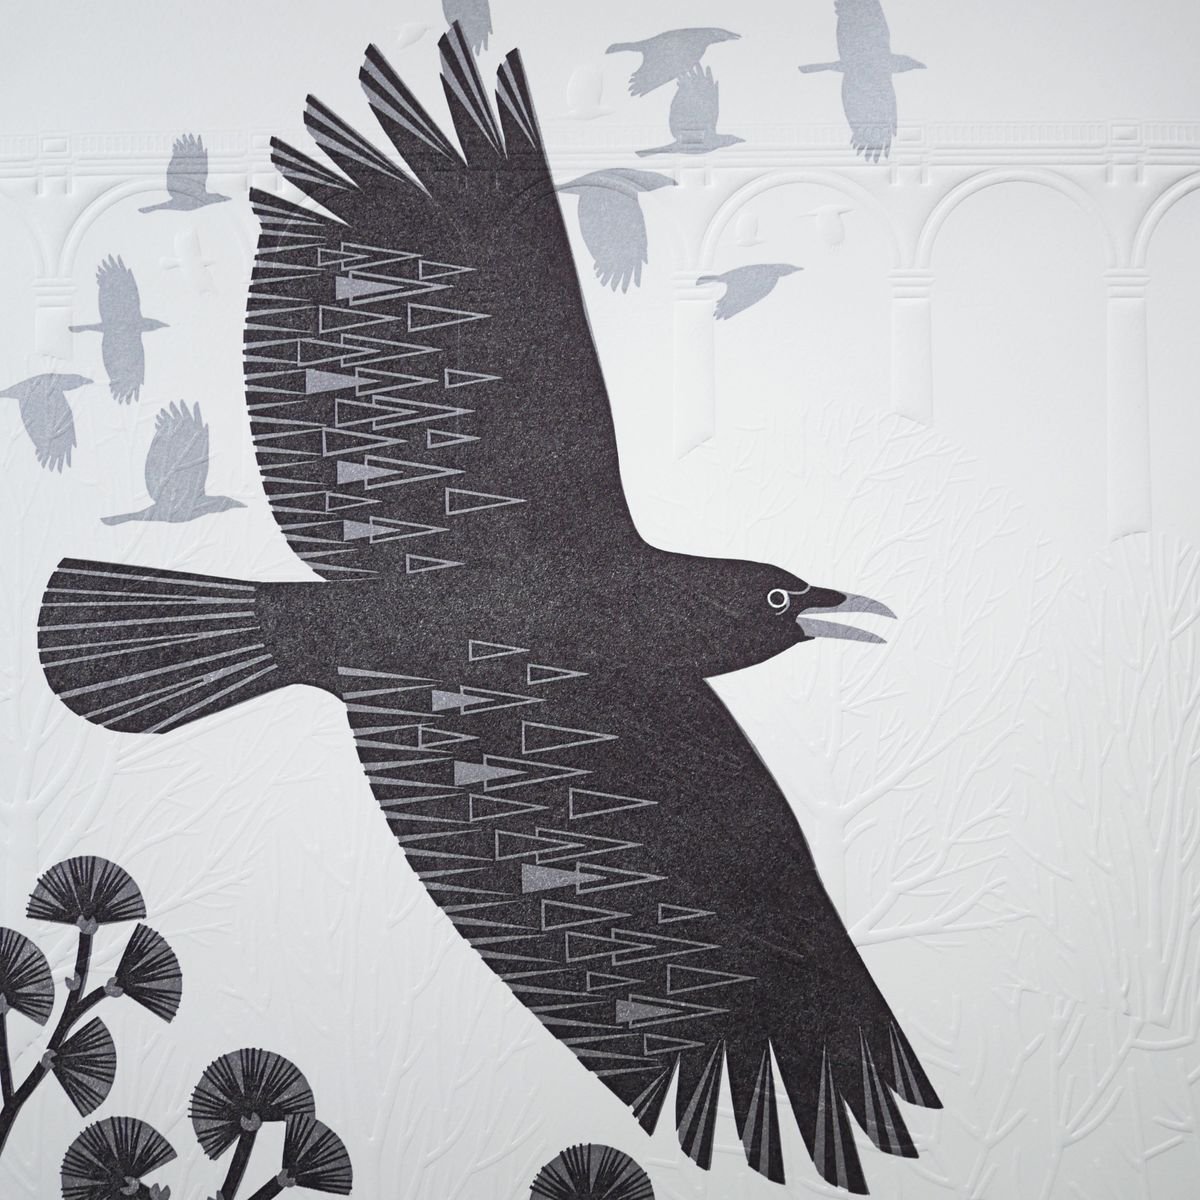 Flying Crow at the Viaduct by Ashley Hutchinson